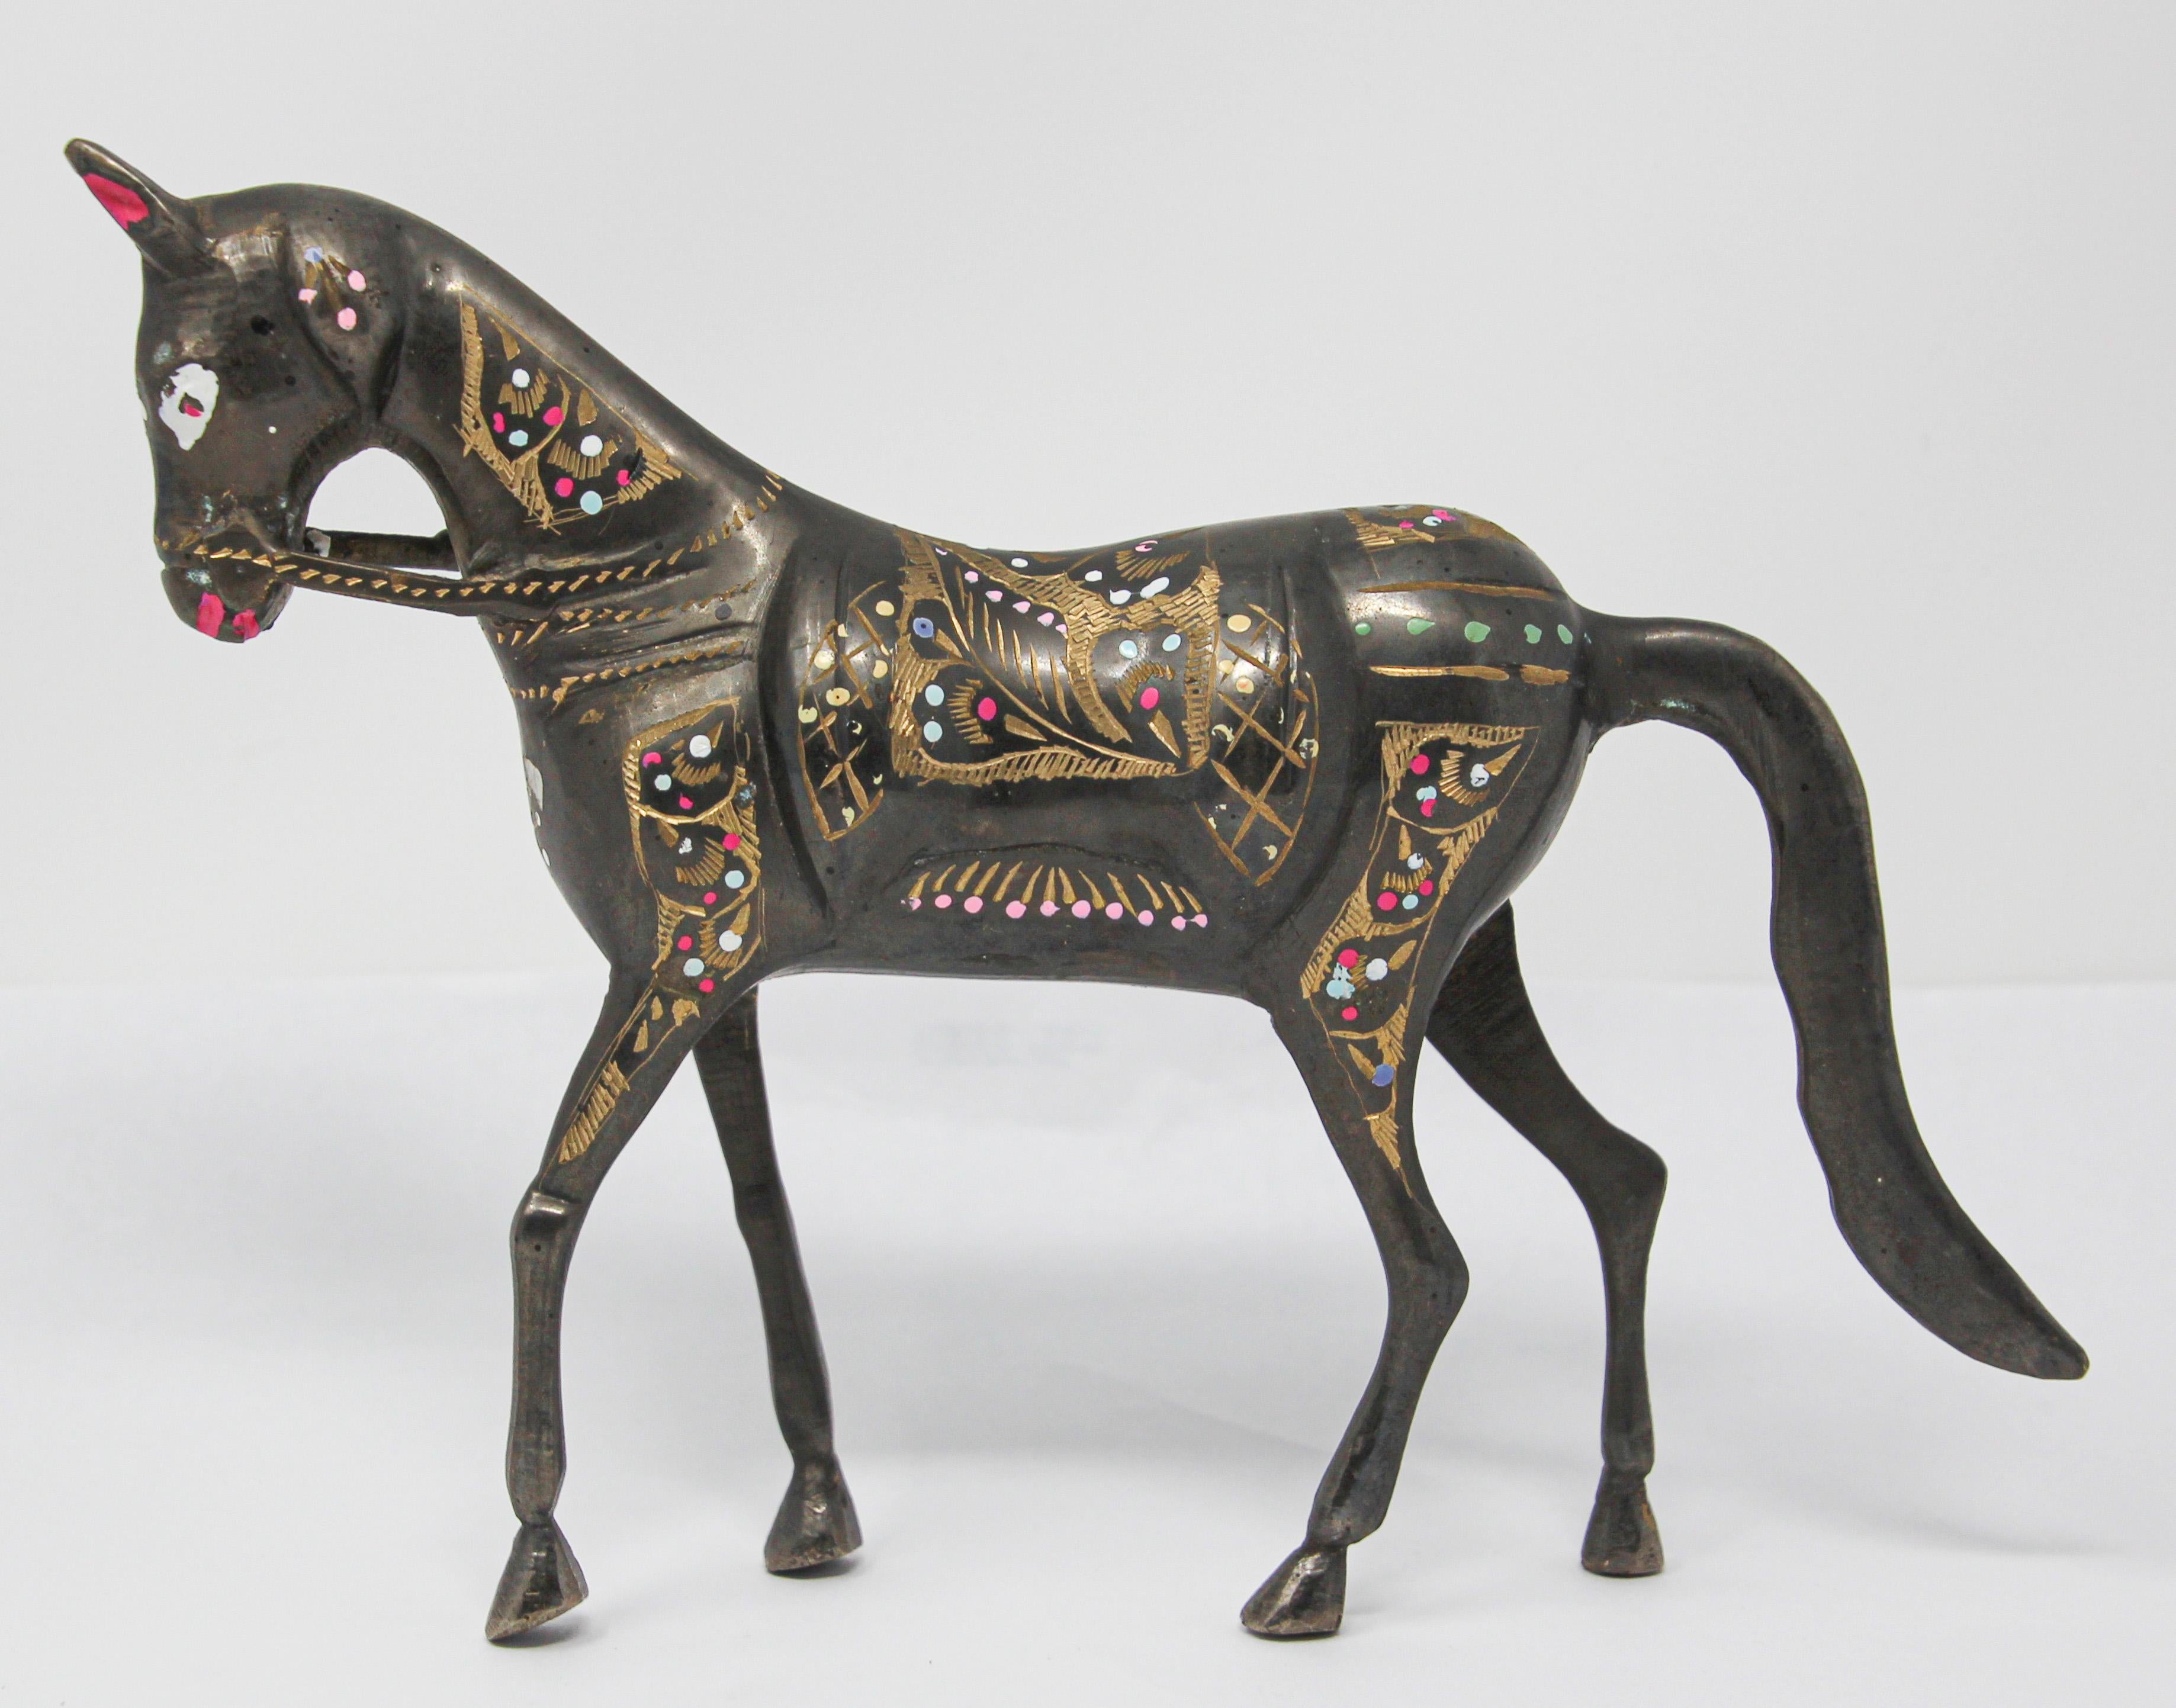 Black horse baraat or ghodi is the horse wearing a ceremonial traditional Indian colorful costume.
The groom in India always arrive at the wedding ceremony riding a horse with the procession of guests and family members.
This small metal